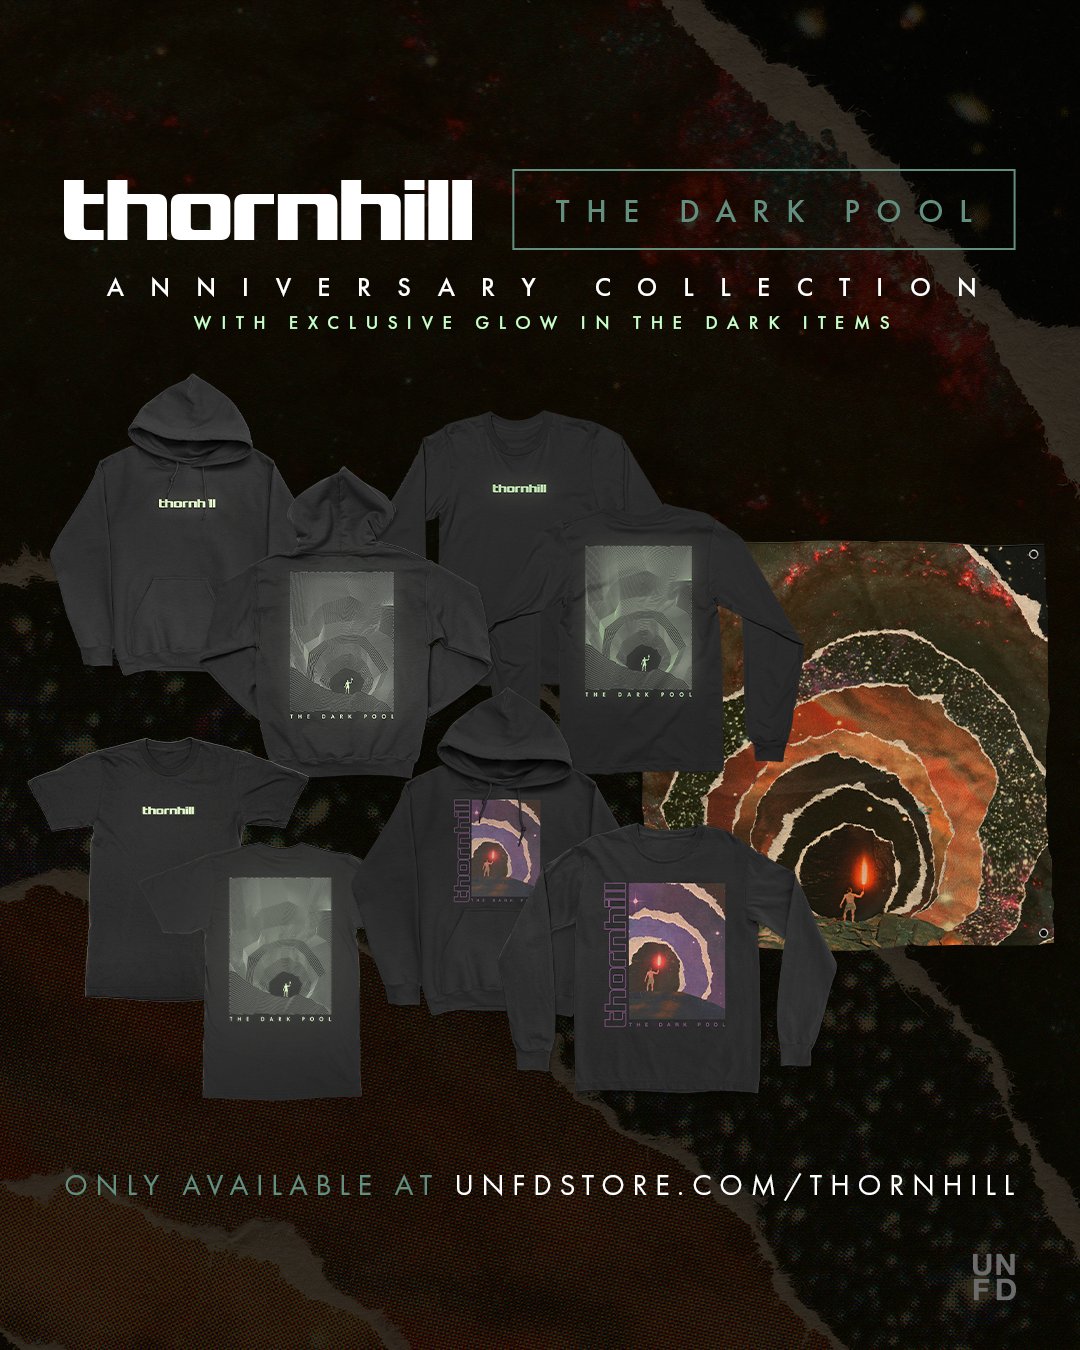 Thornhill on Twitter: "3 years since TDP don't tell me how it changed your life and the new merch ya cheapskates go run it" / Twitter